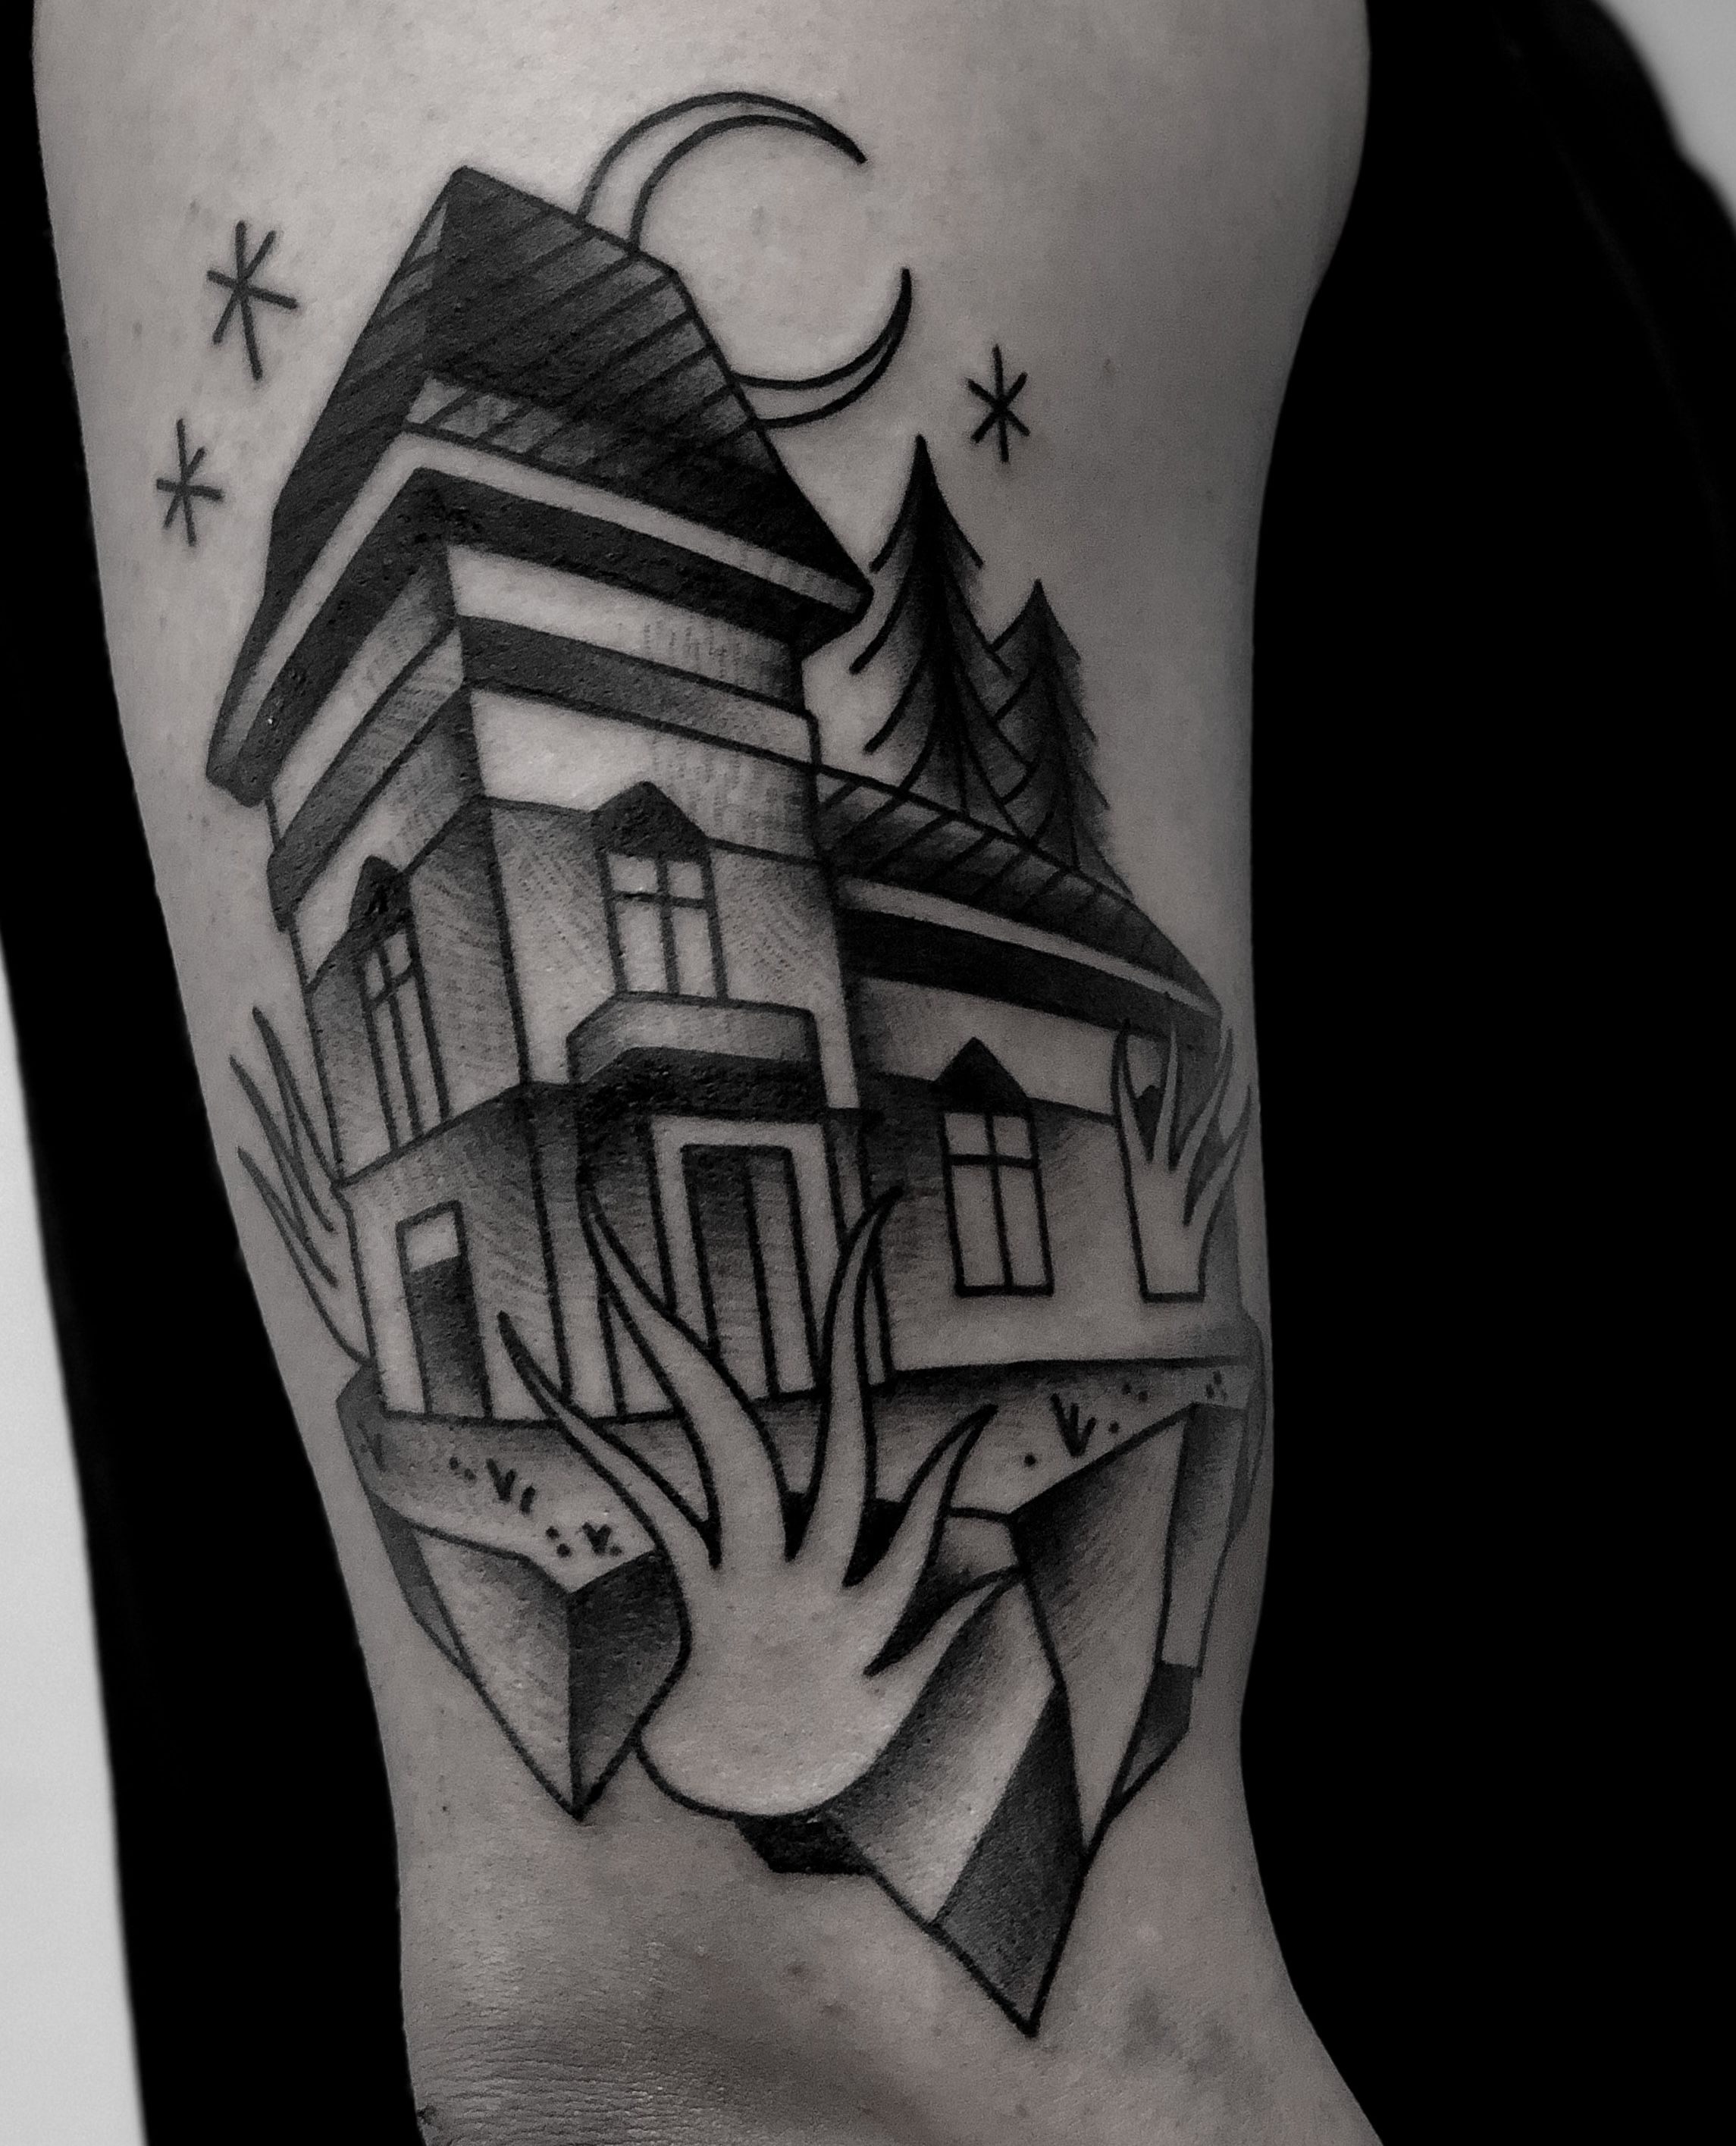 Haunted House by @mattbrumelow at @inkanddaggertattoo in Roswell, Georgia.  #hauntedhousetattoo #pumpkintattoo #mattbrumelow #inkanddagger... |  Instagram